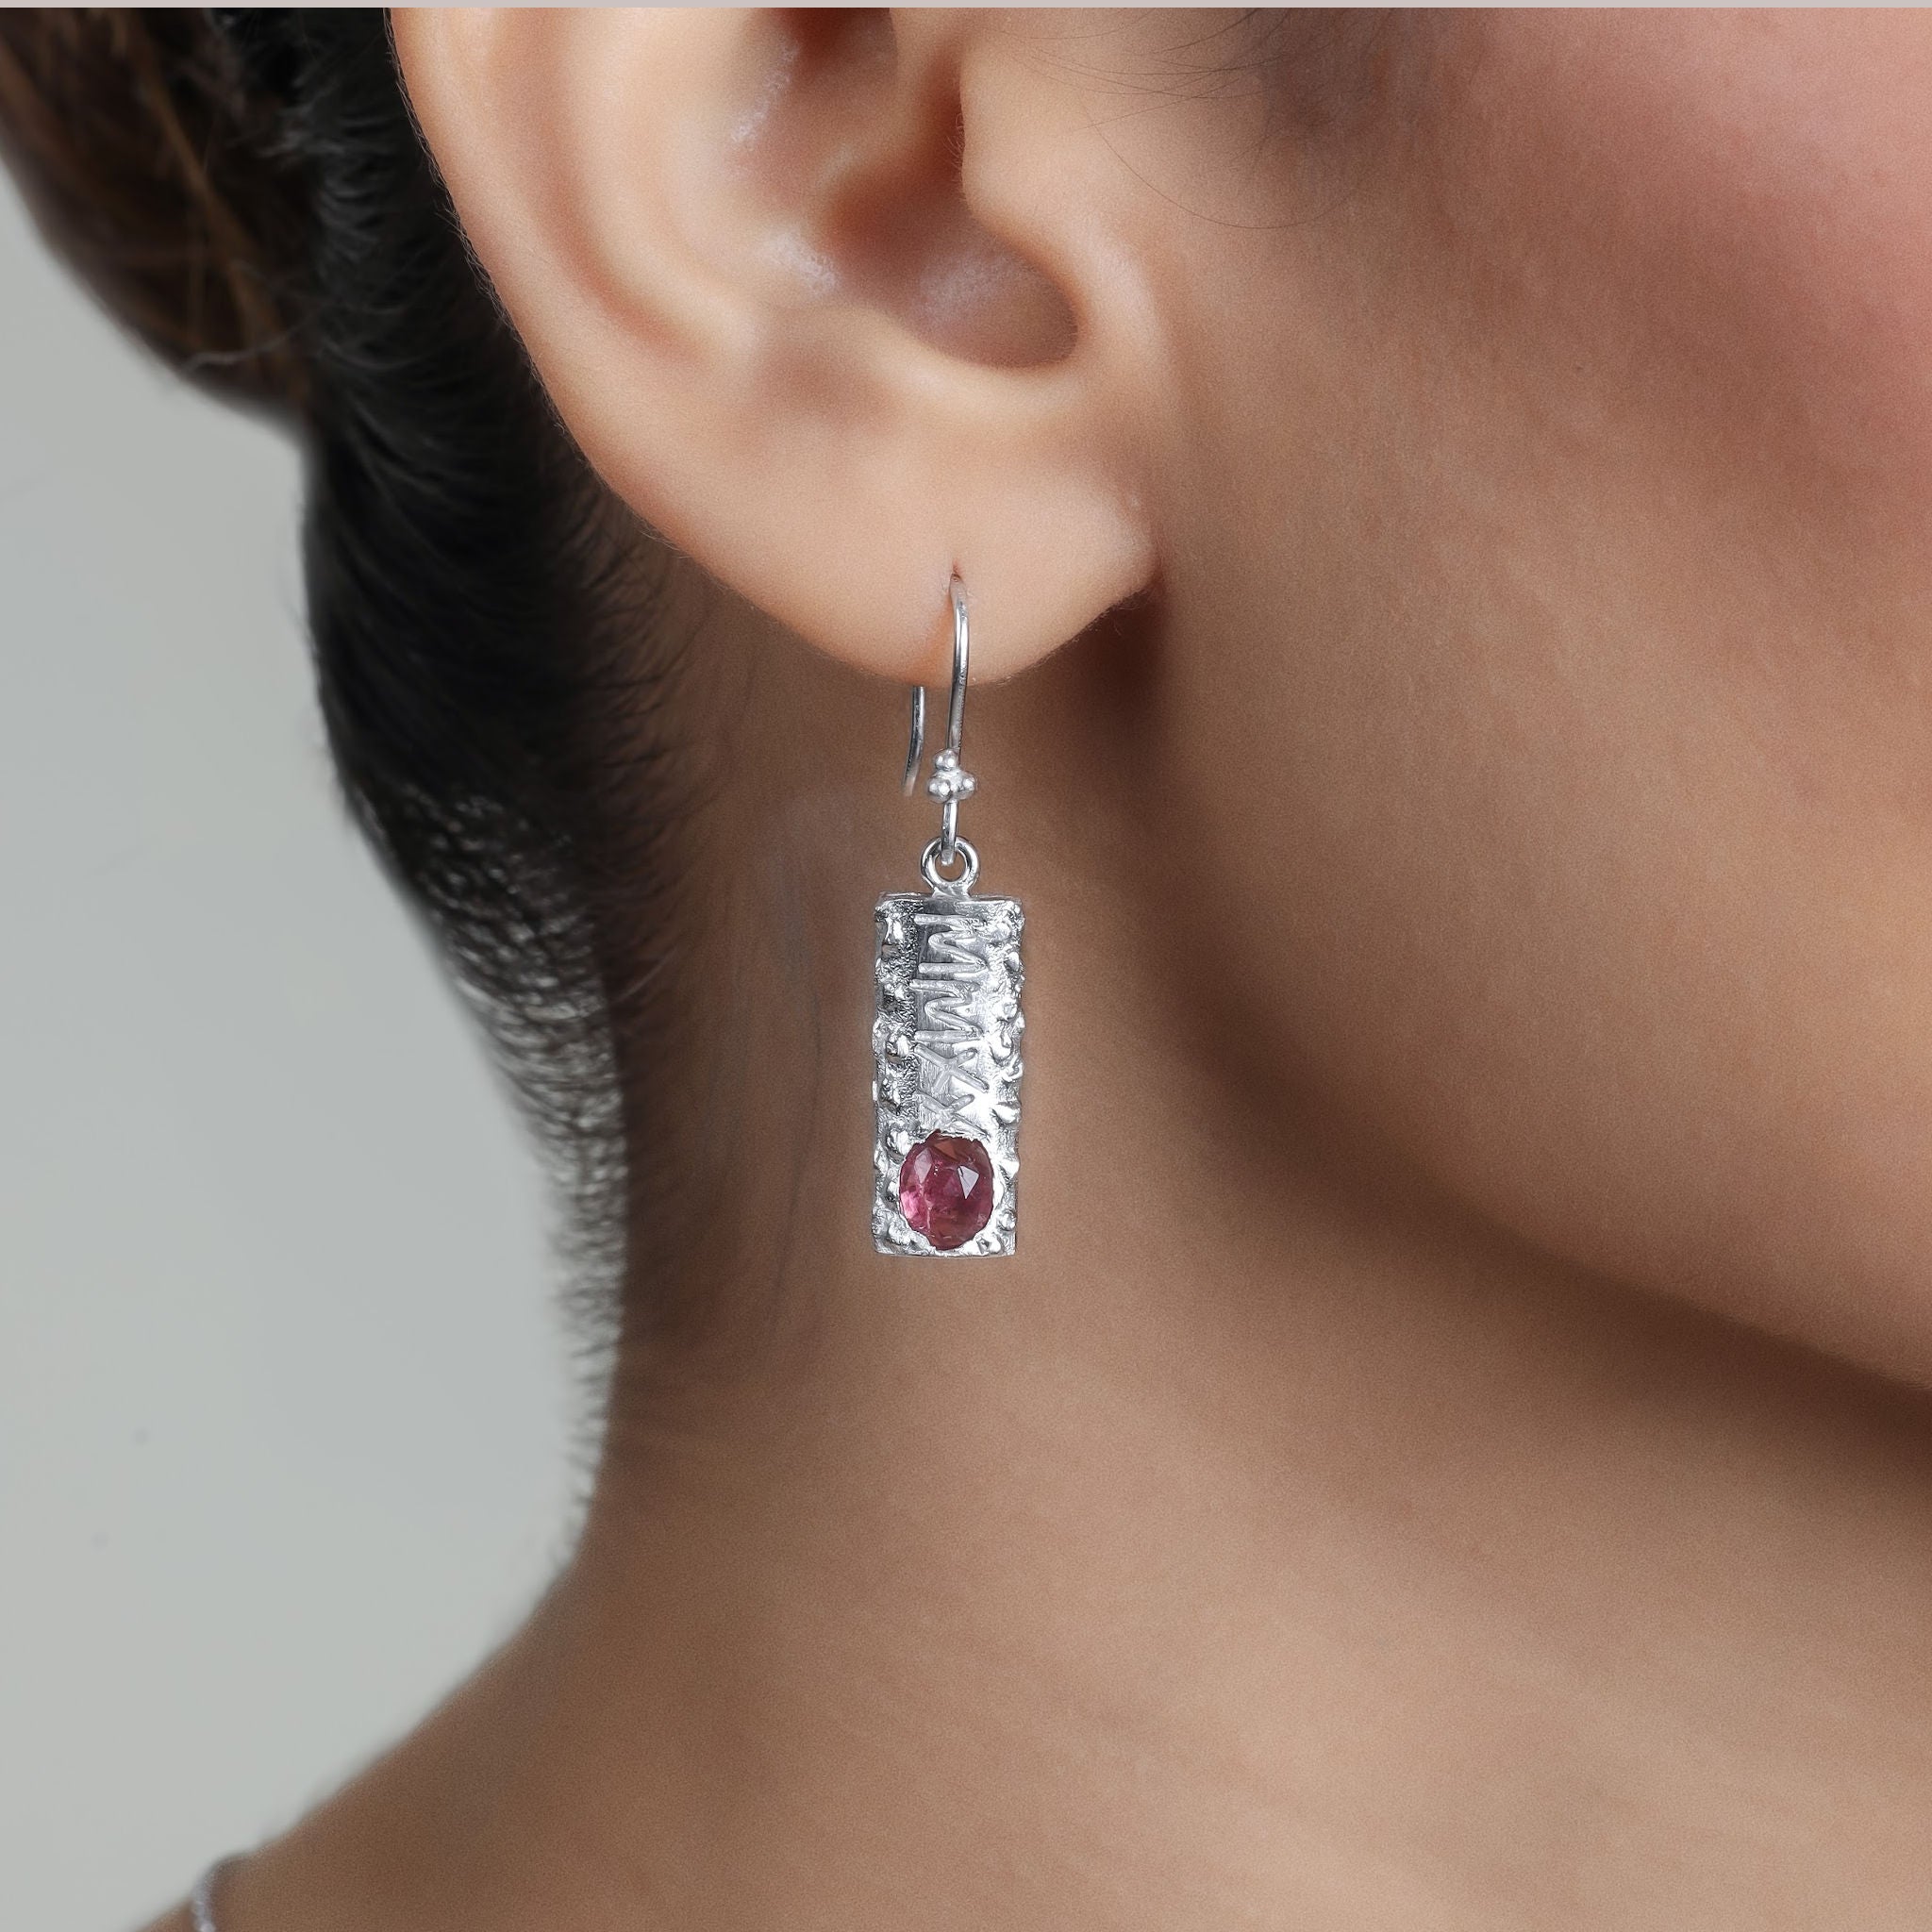 HumanKind Earrings. Pink Tourmaline Ombre. 925 Silver